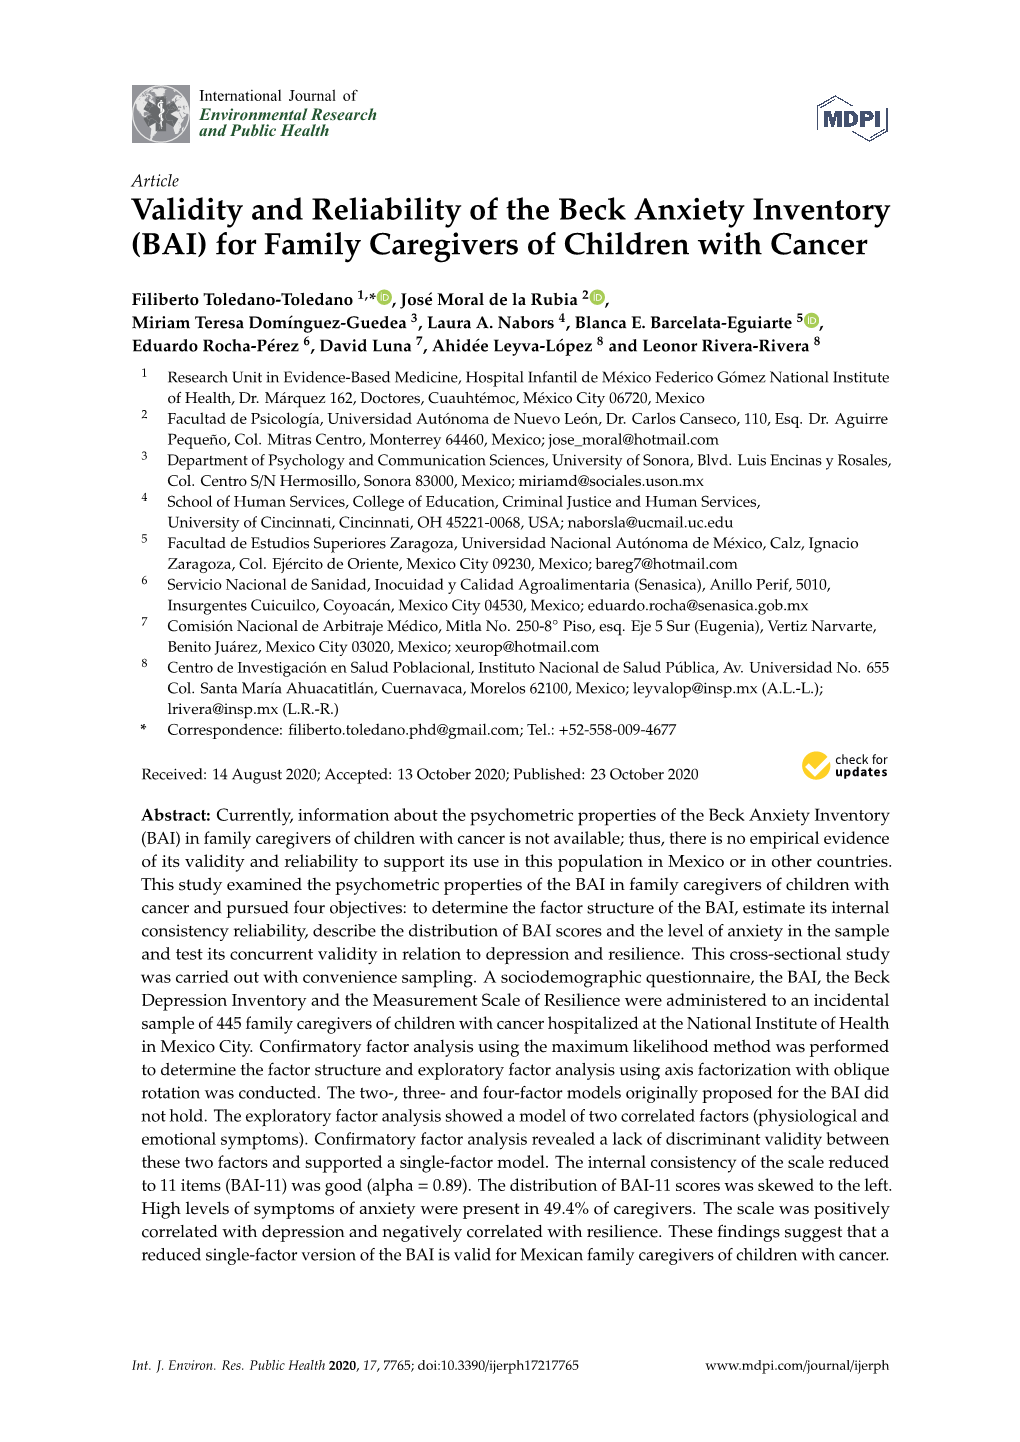 Validity and Reliability of the Beck Anxiety Inventory (BAI) for Family Caregivers of Children with Cancer